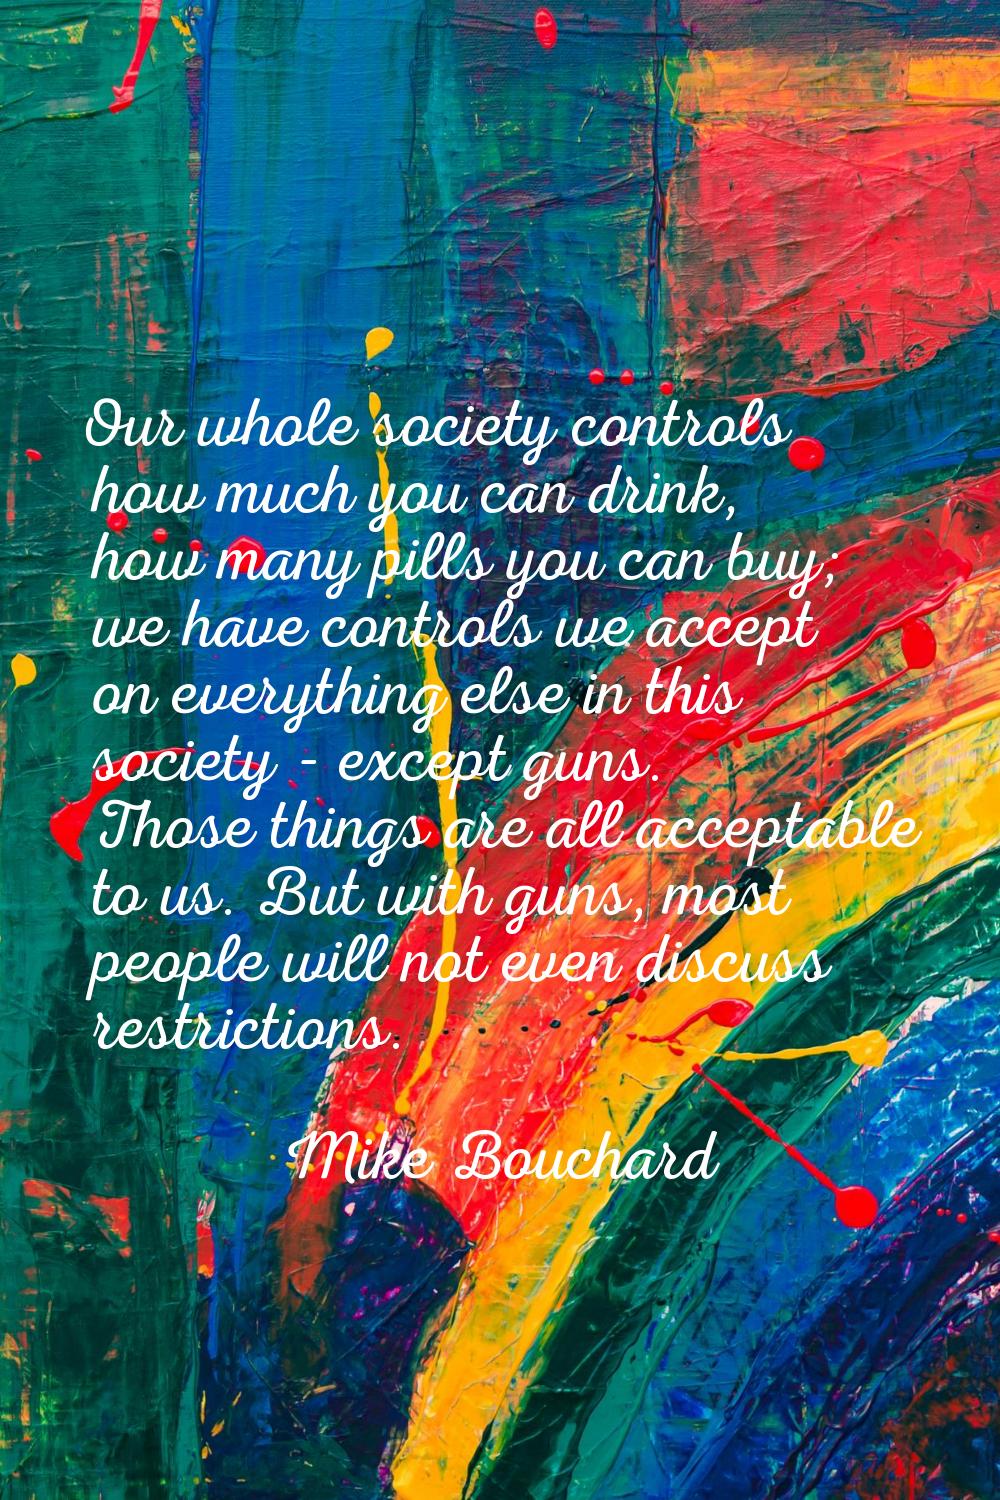 Our whole society controls how much you can drink, how many pills you can buy; we have controls we 